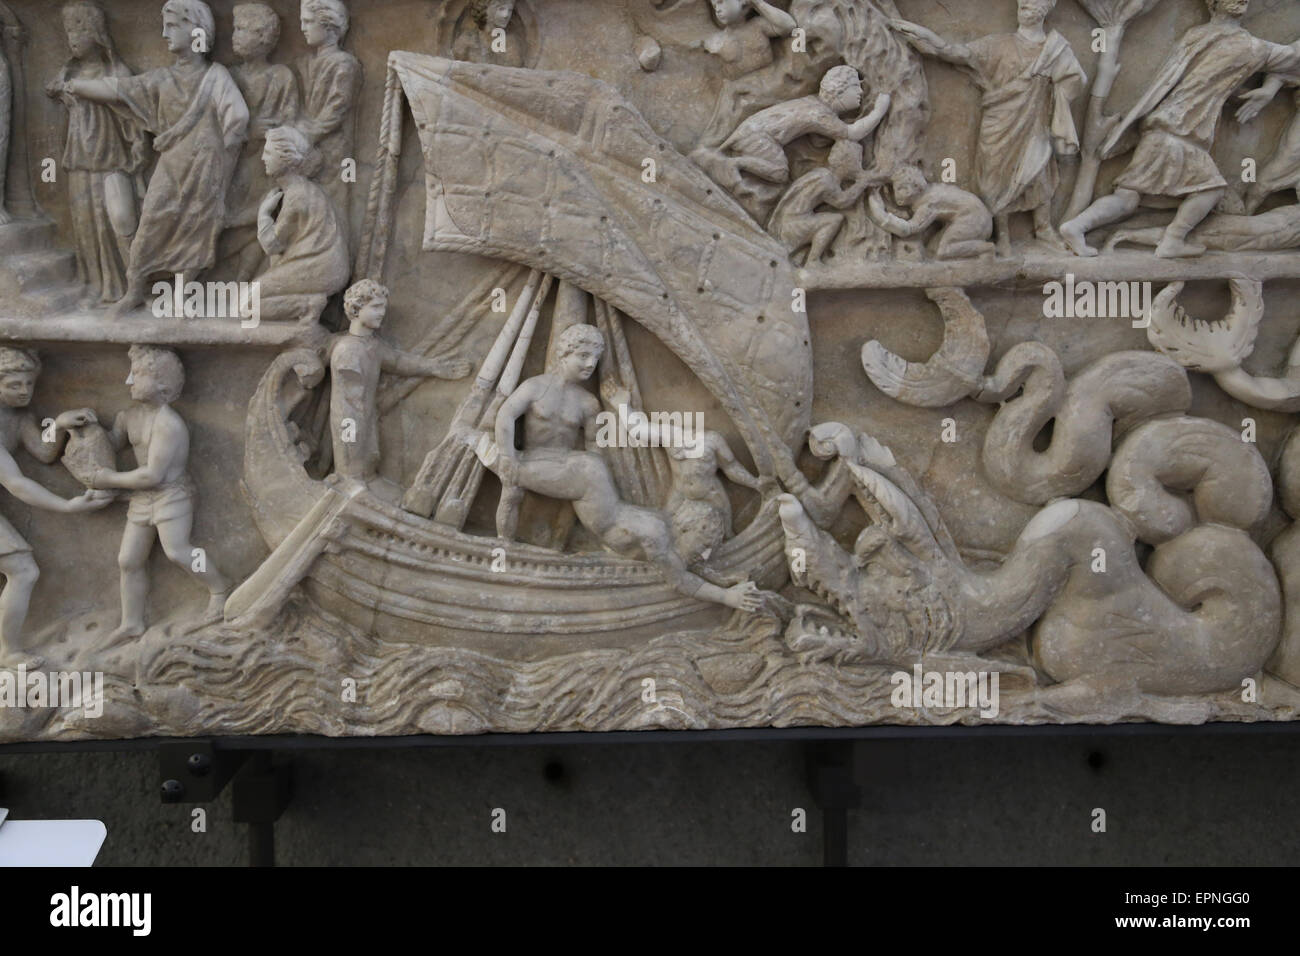 Roman era. Early Christian. Sarcophagus of Jonah. About 300 AD. Vatican Museums. Stock Photo